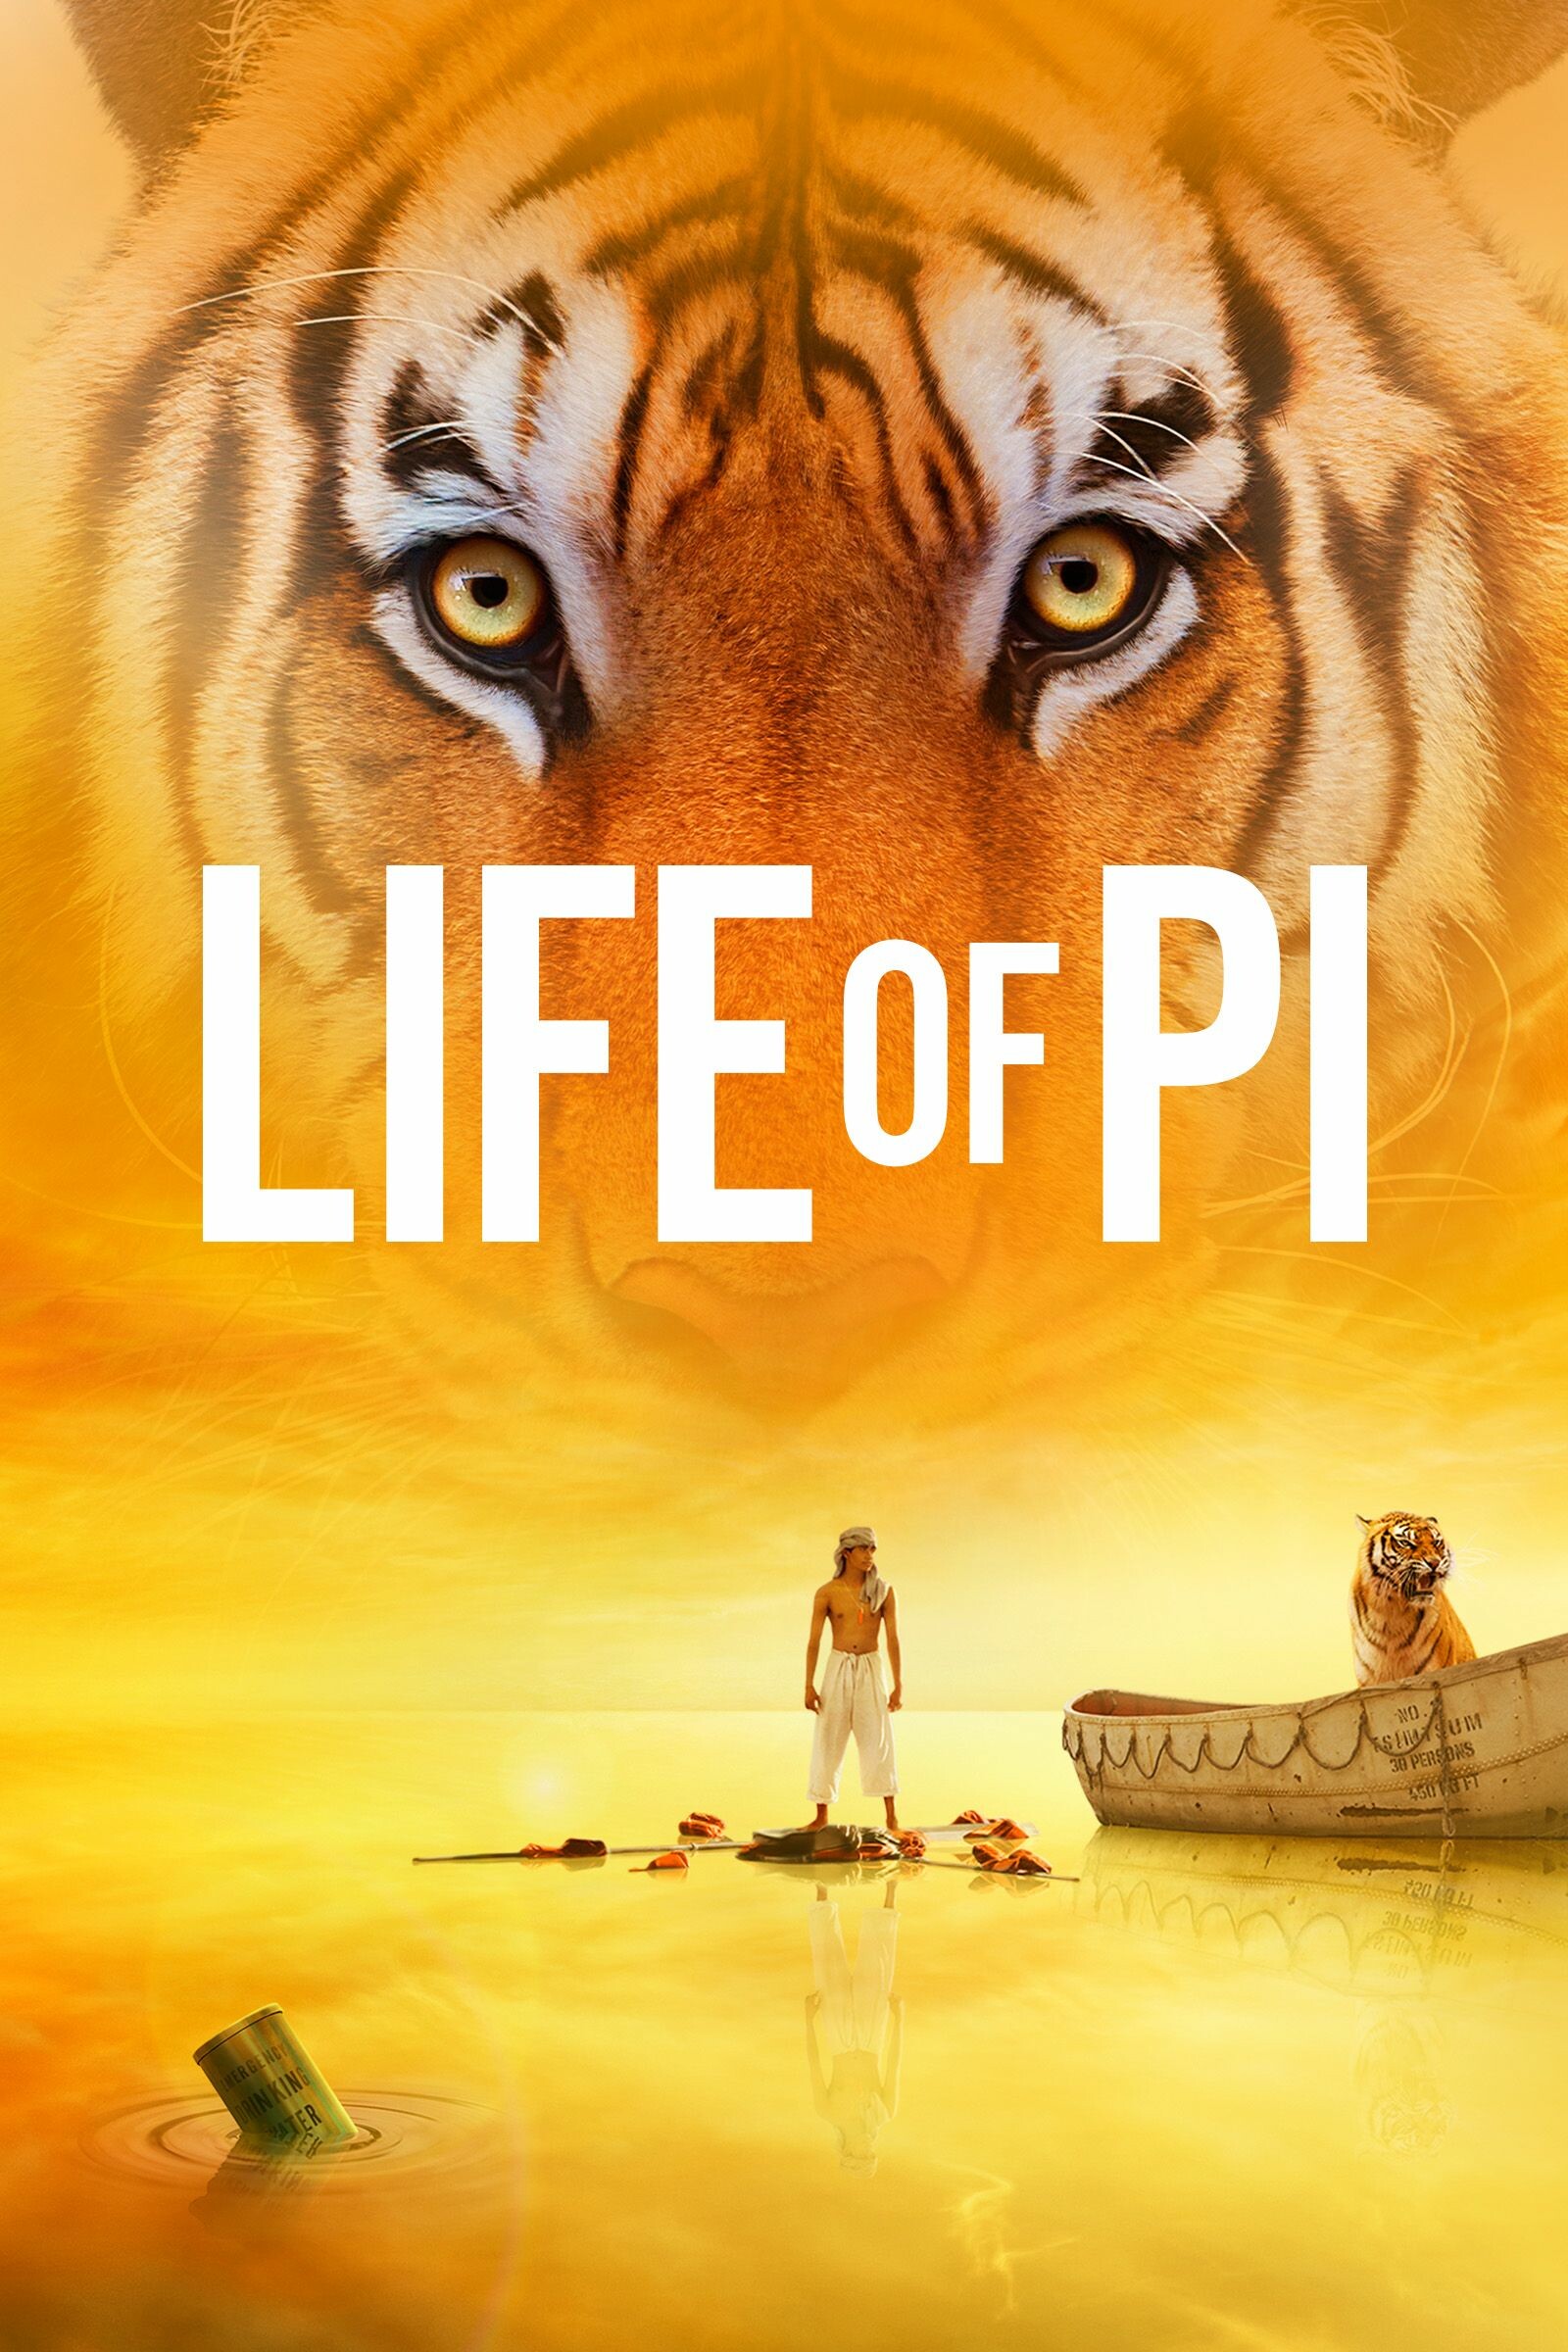 Life of Pi: The film became a critical and commercial success, having grossed over $609 million. 1600x2400 HD Wallpaper.